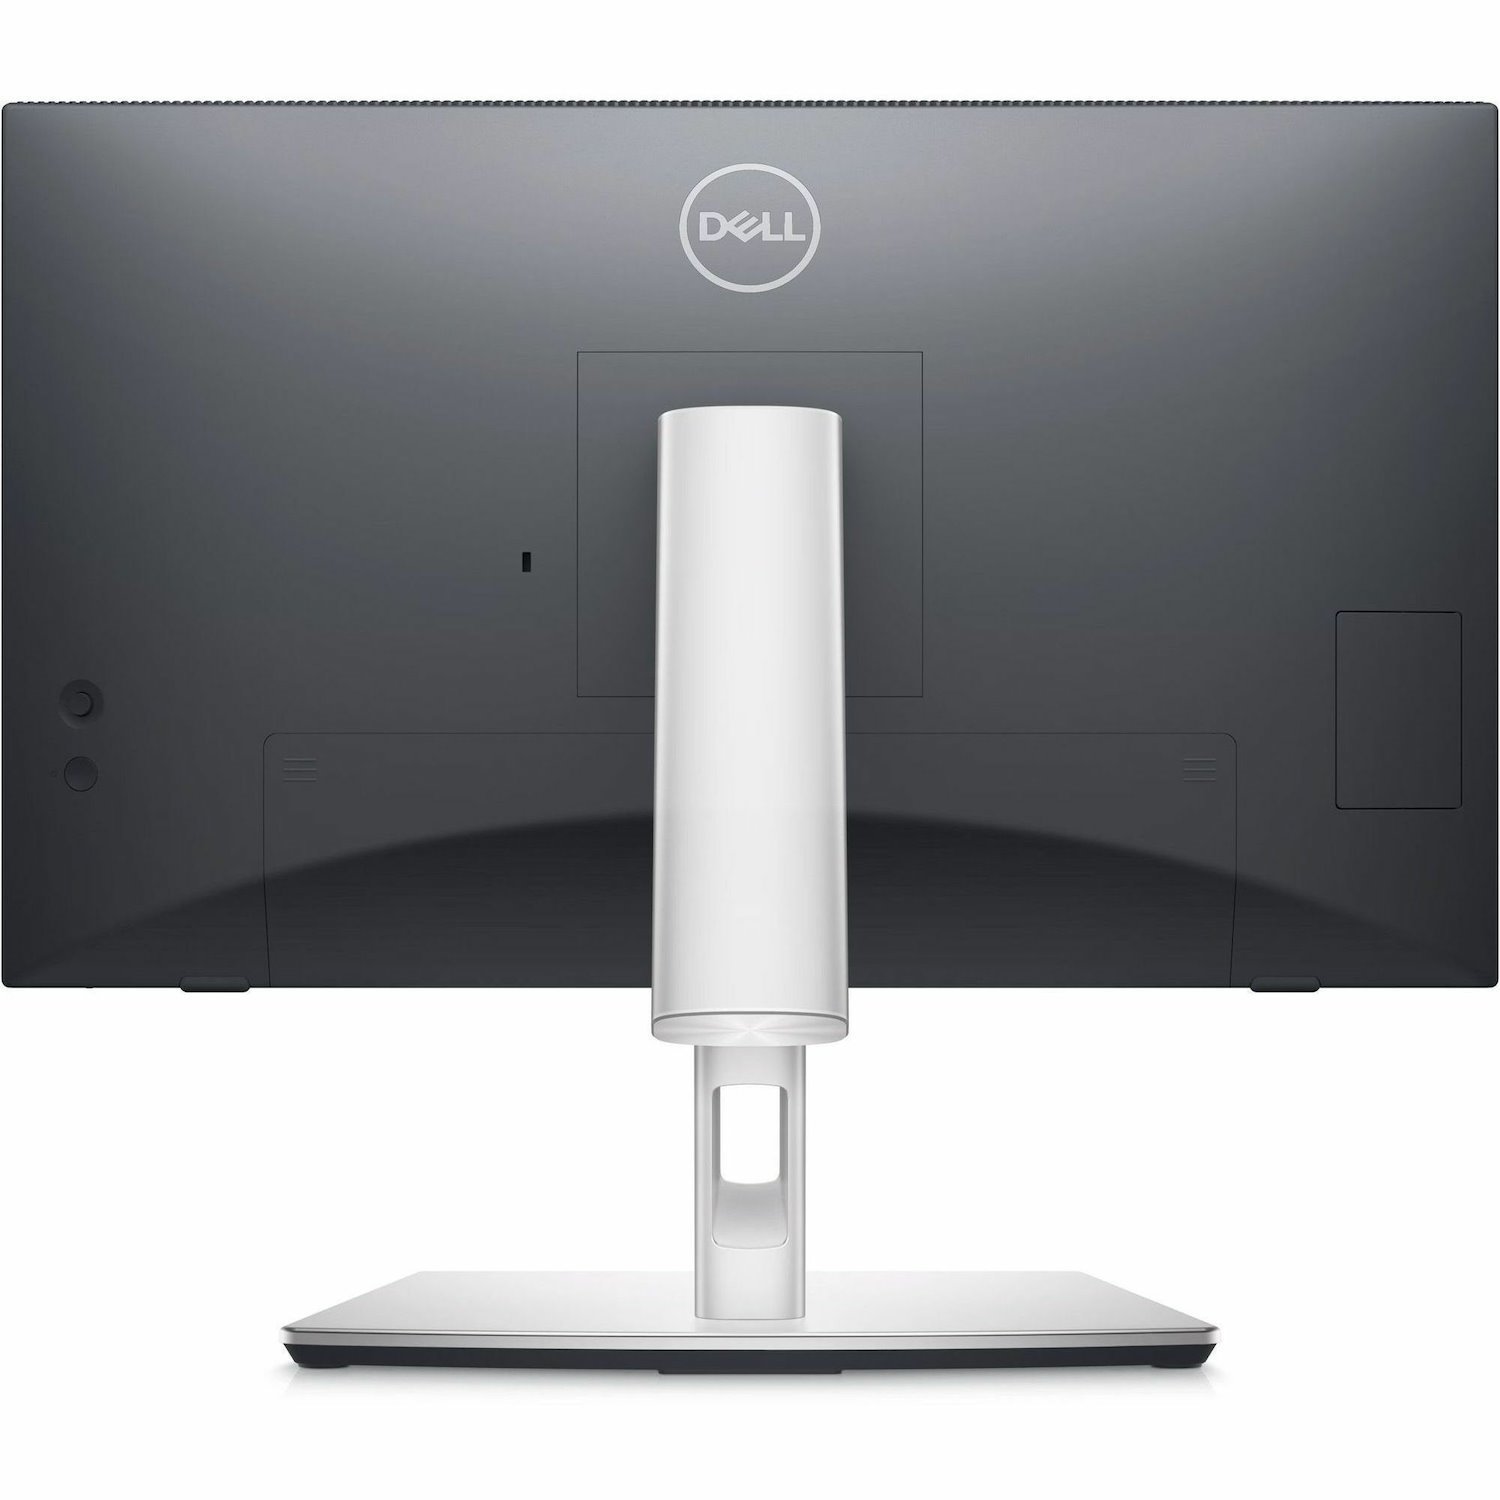 Dell P2424HT 24" Class LED Touchscreen Monitor - 16:9 - 5 ms